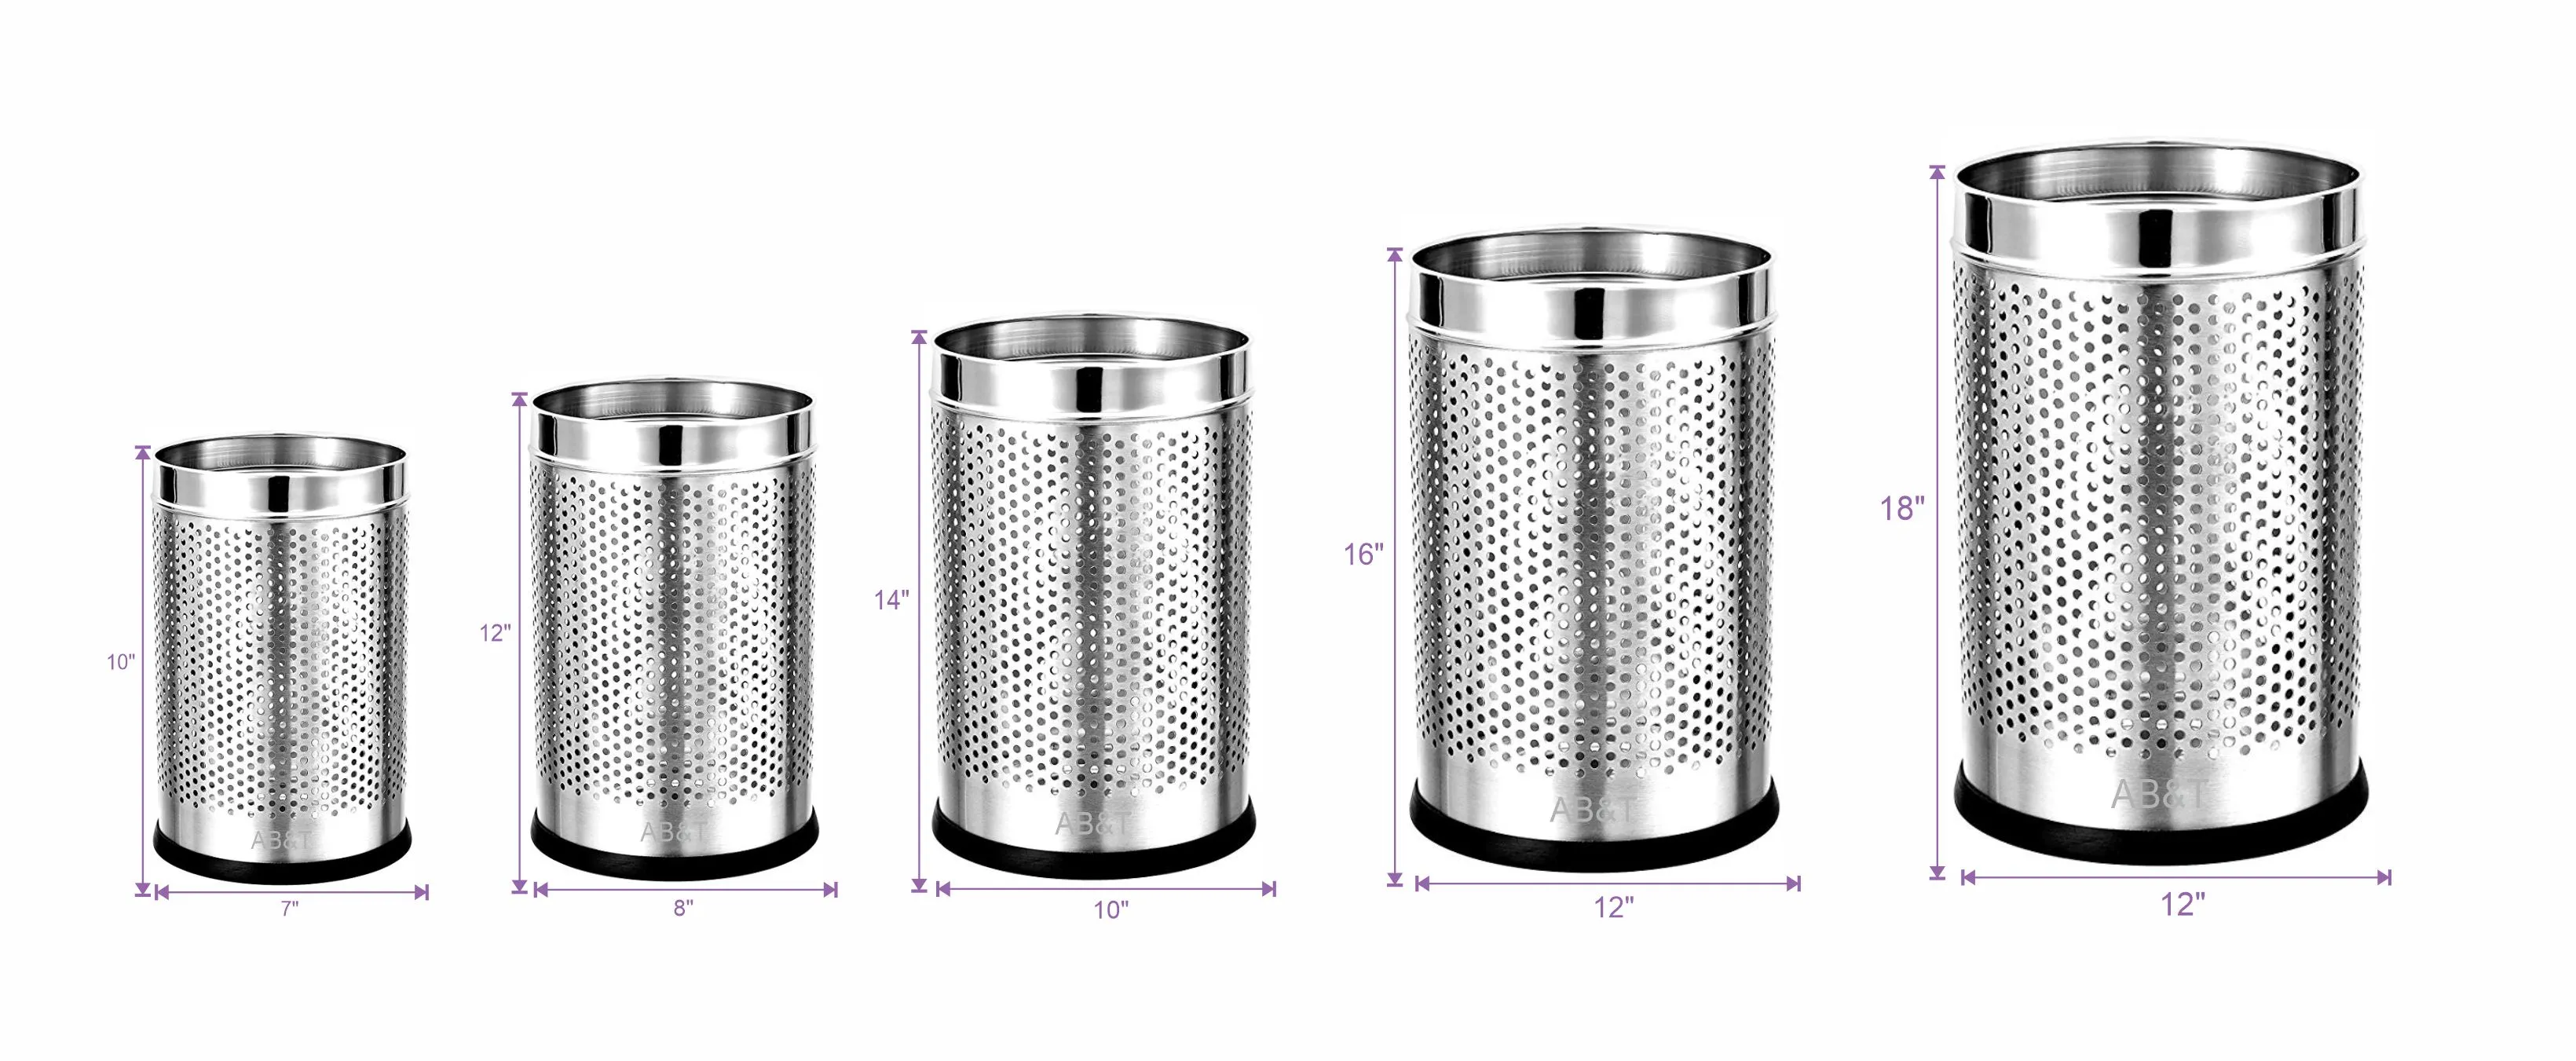 steel dustbins for hotels